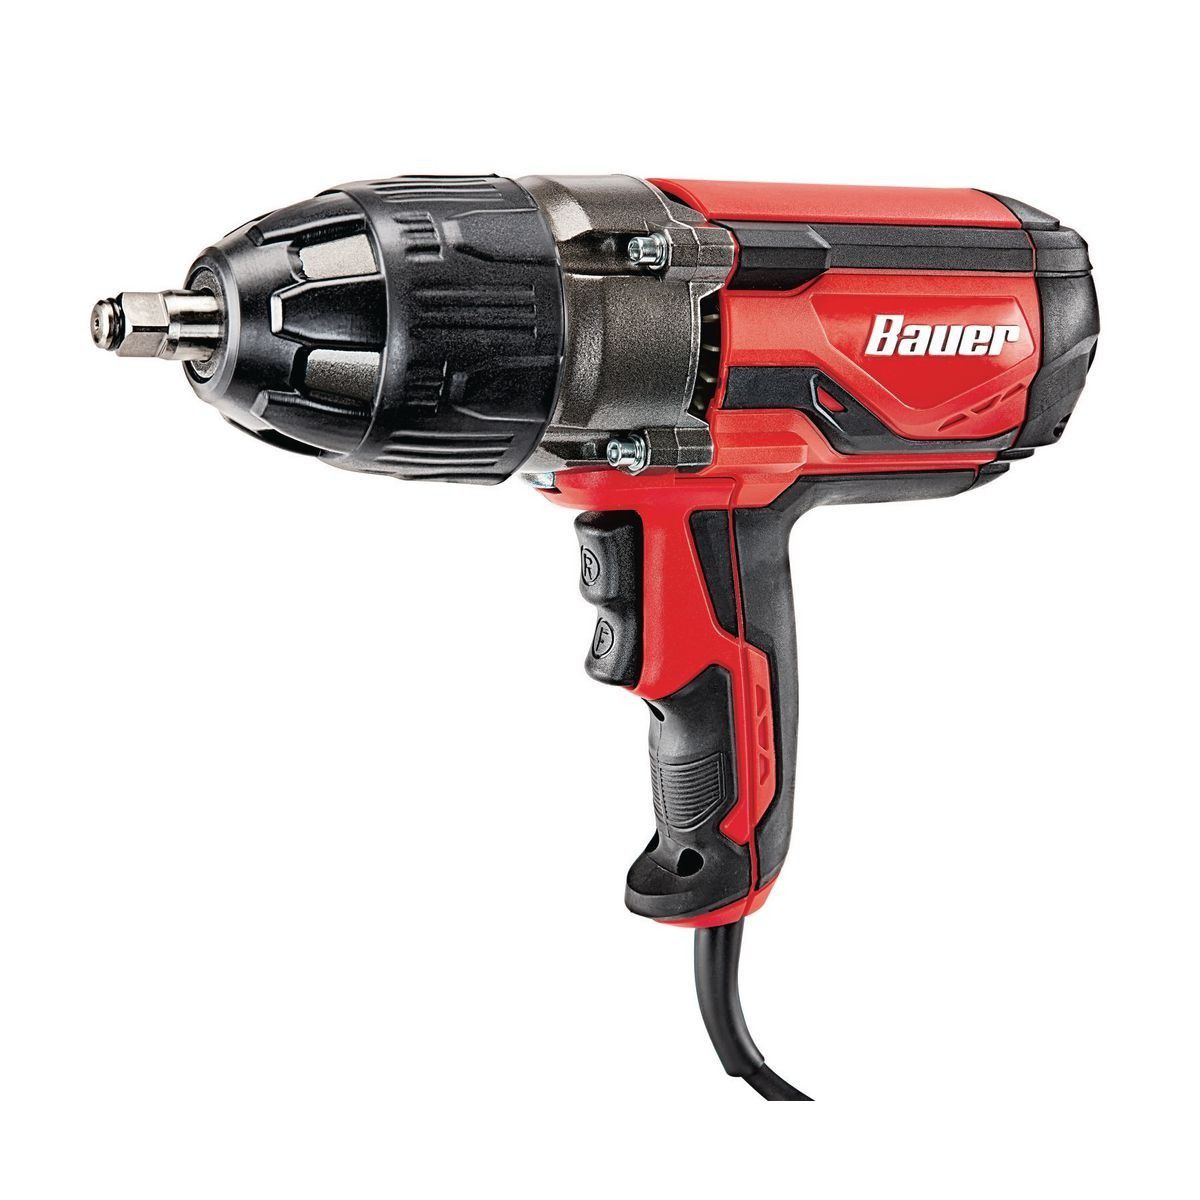 8.5 Amp Corded 1/2 In. Heavy Duty Extreme Torque Impact Wrench